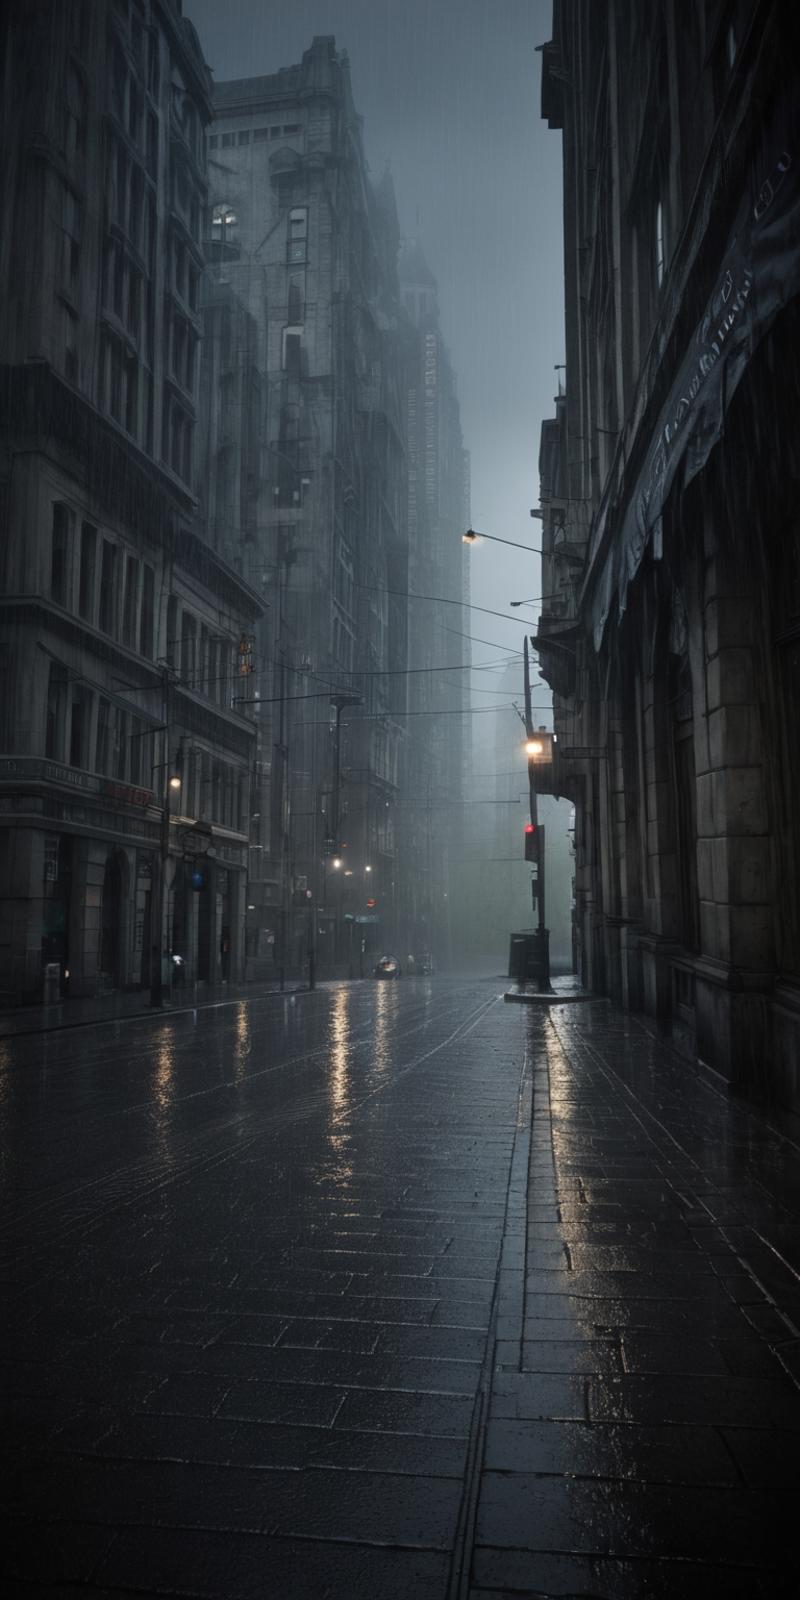 The Rainy City: A Street Scene in a Large City at Night